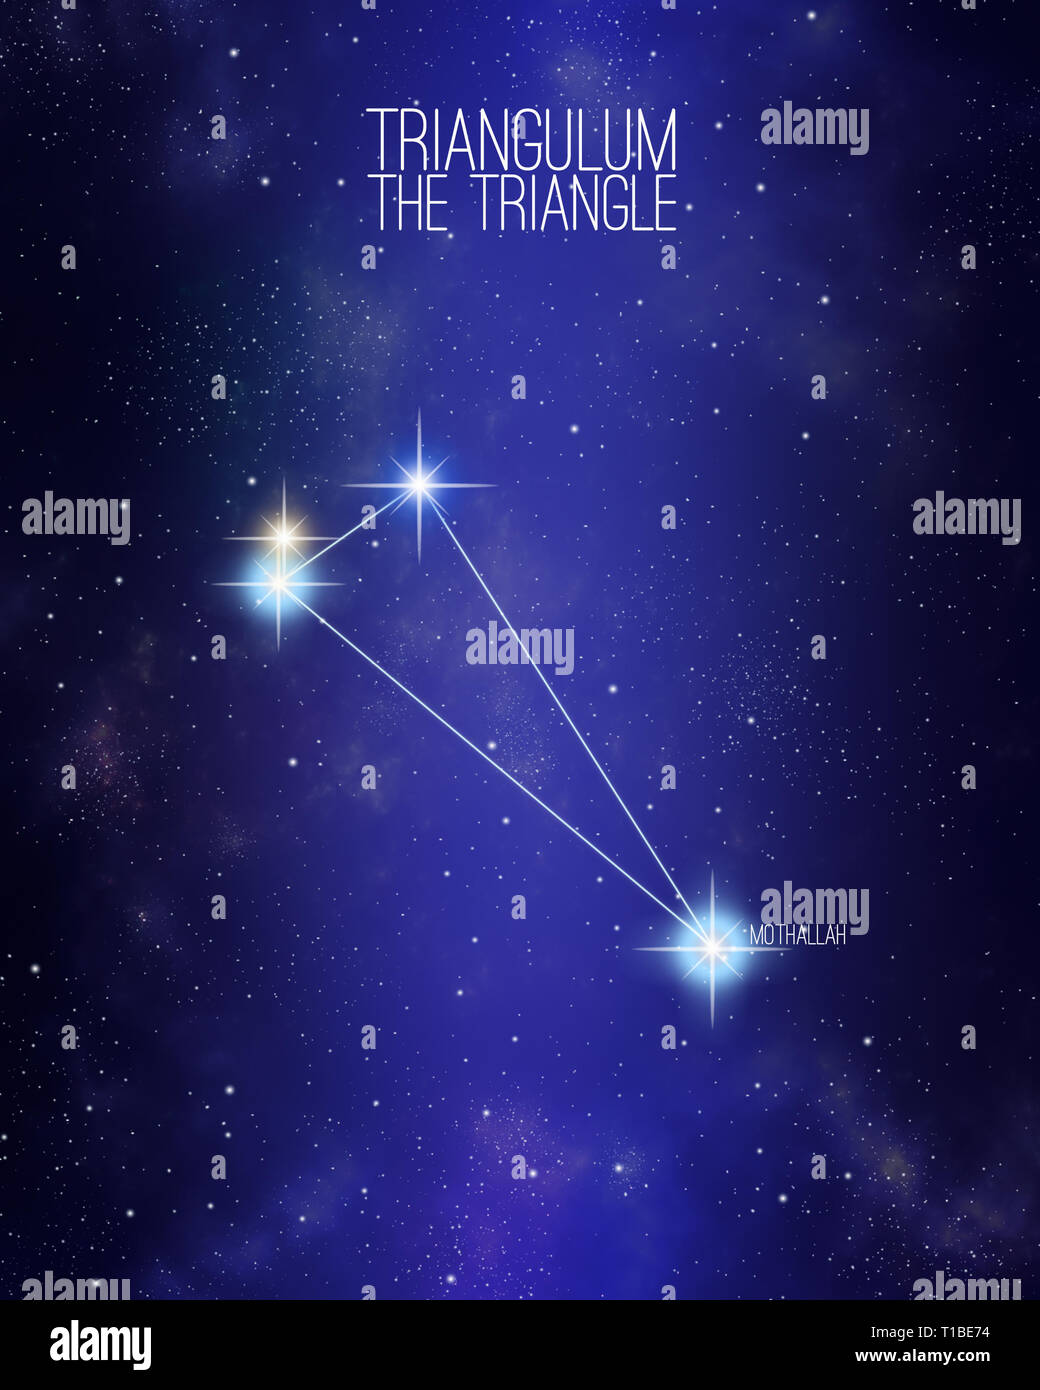 https://c8.alamy.com/comp/T1BE74/triangulum-the-triangle-constellation-on-a-starry-space-background-with-the-names-of-its-main-stars-relative-sizes-and-different-color-shades-based-o-T1BE74.jpg